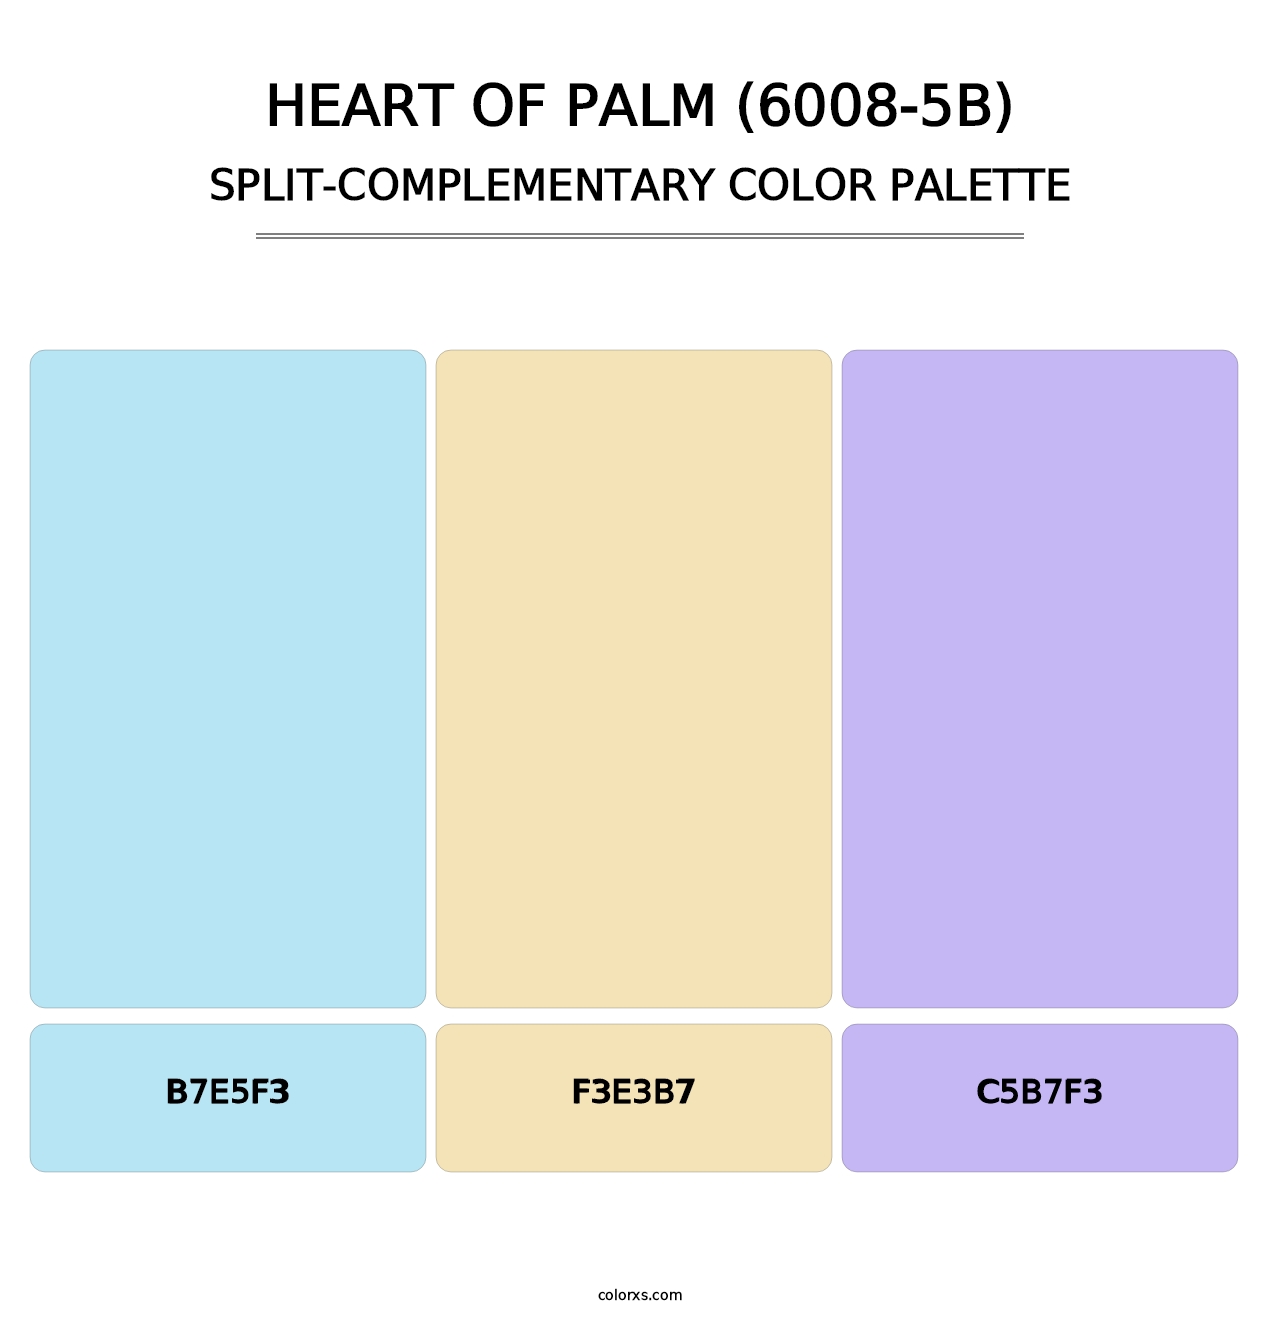 Heart of Palm (6008-5B) - Split-Complementary Color Palette